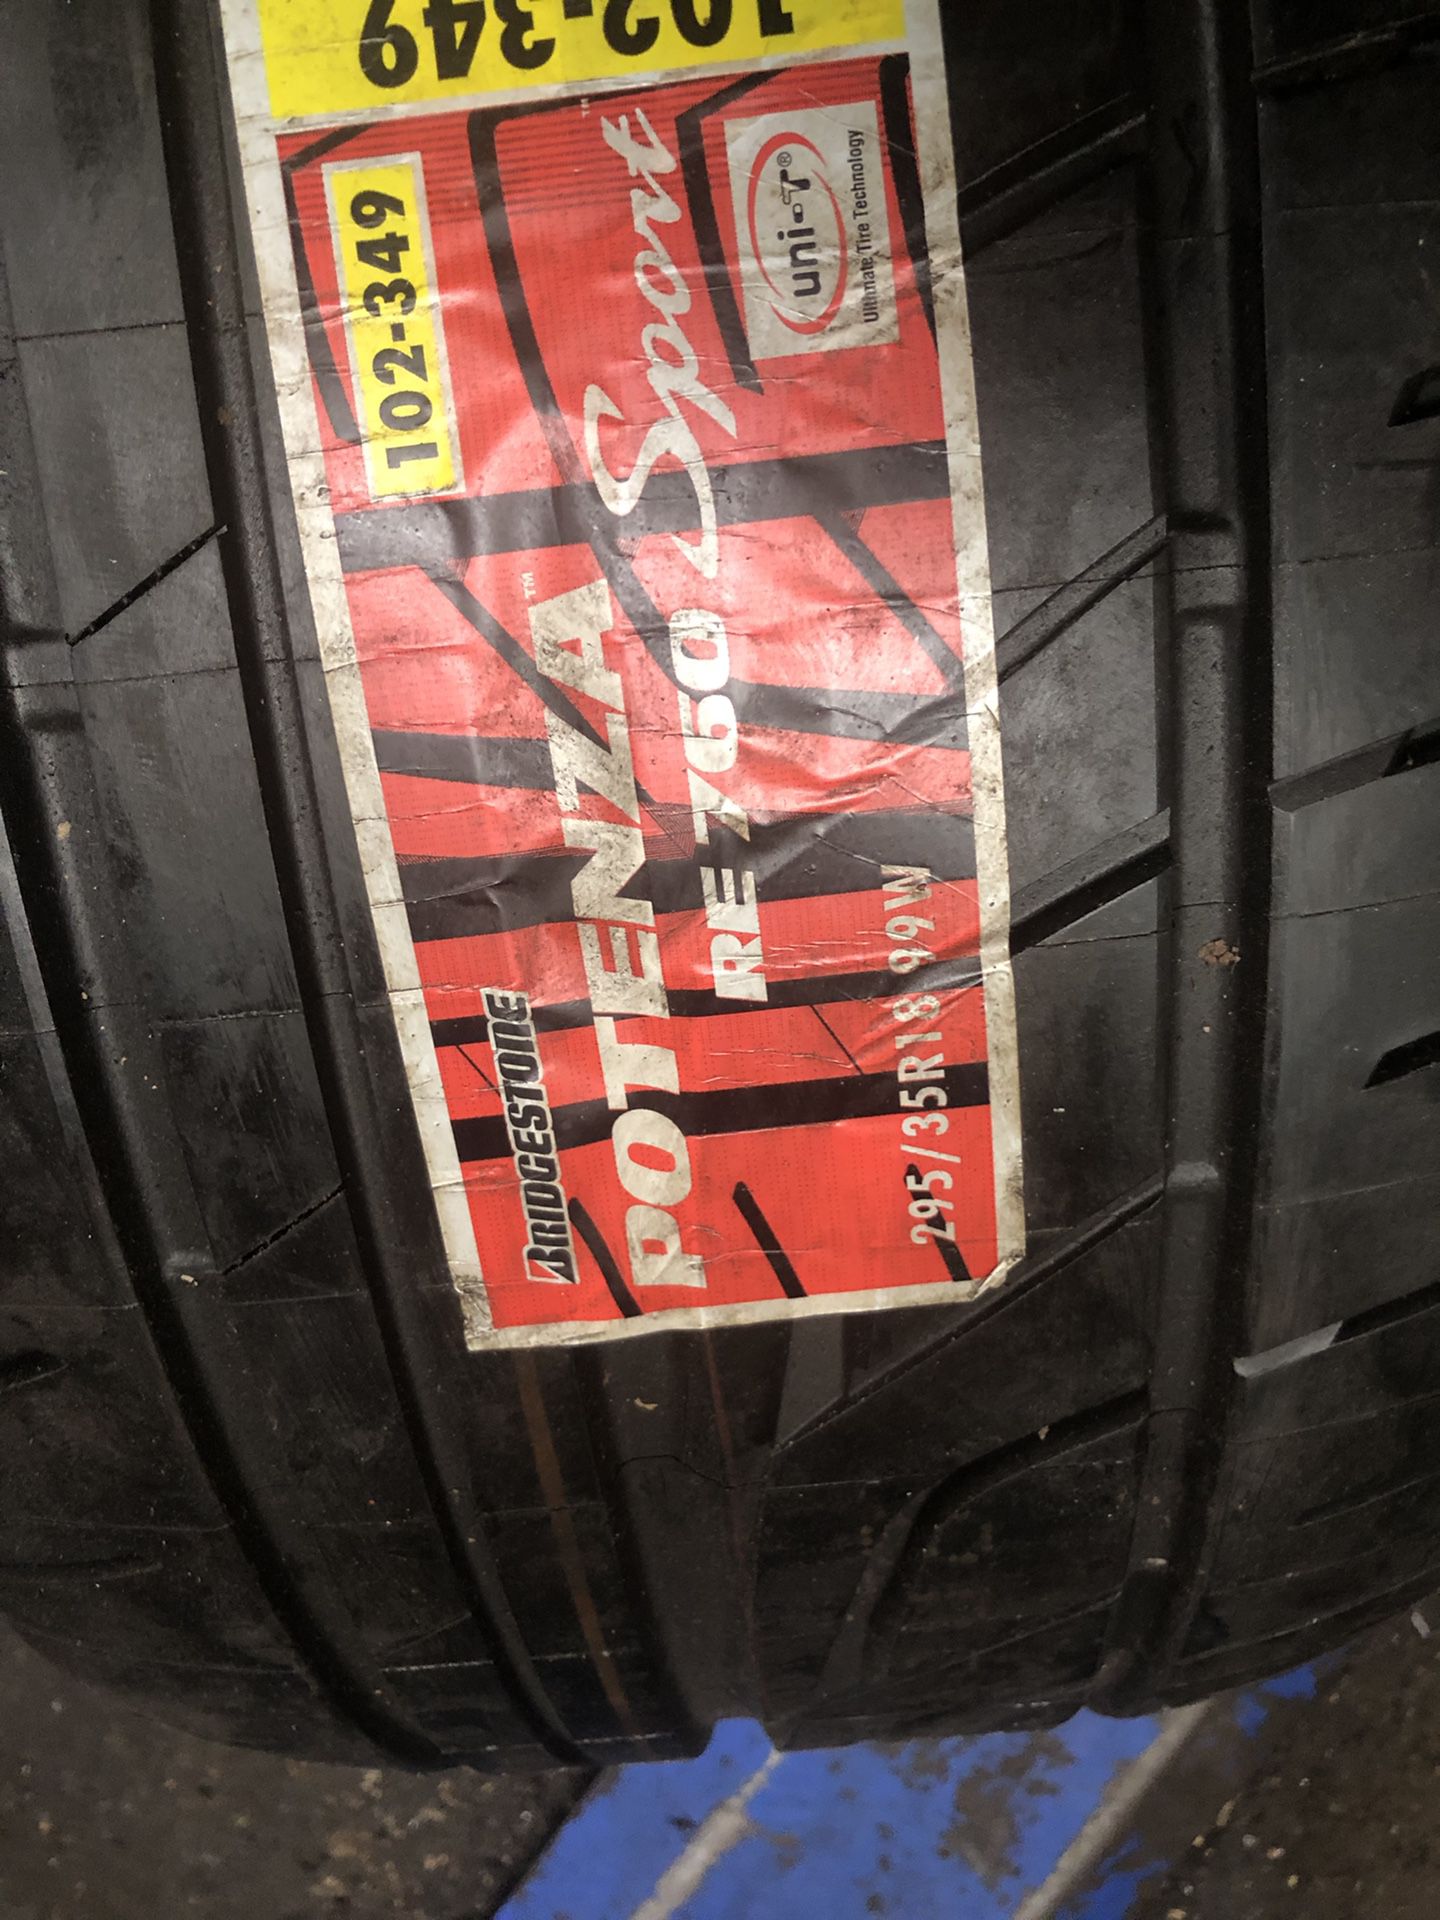 Only one 295/35r18